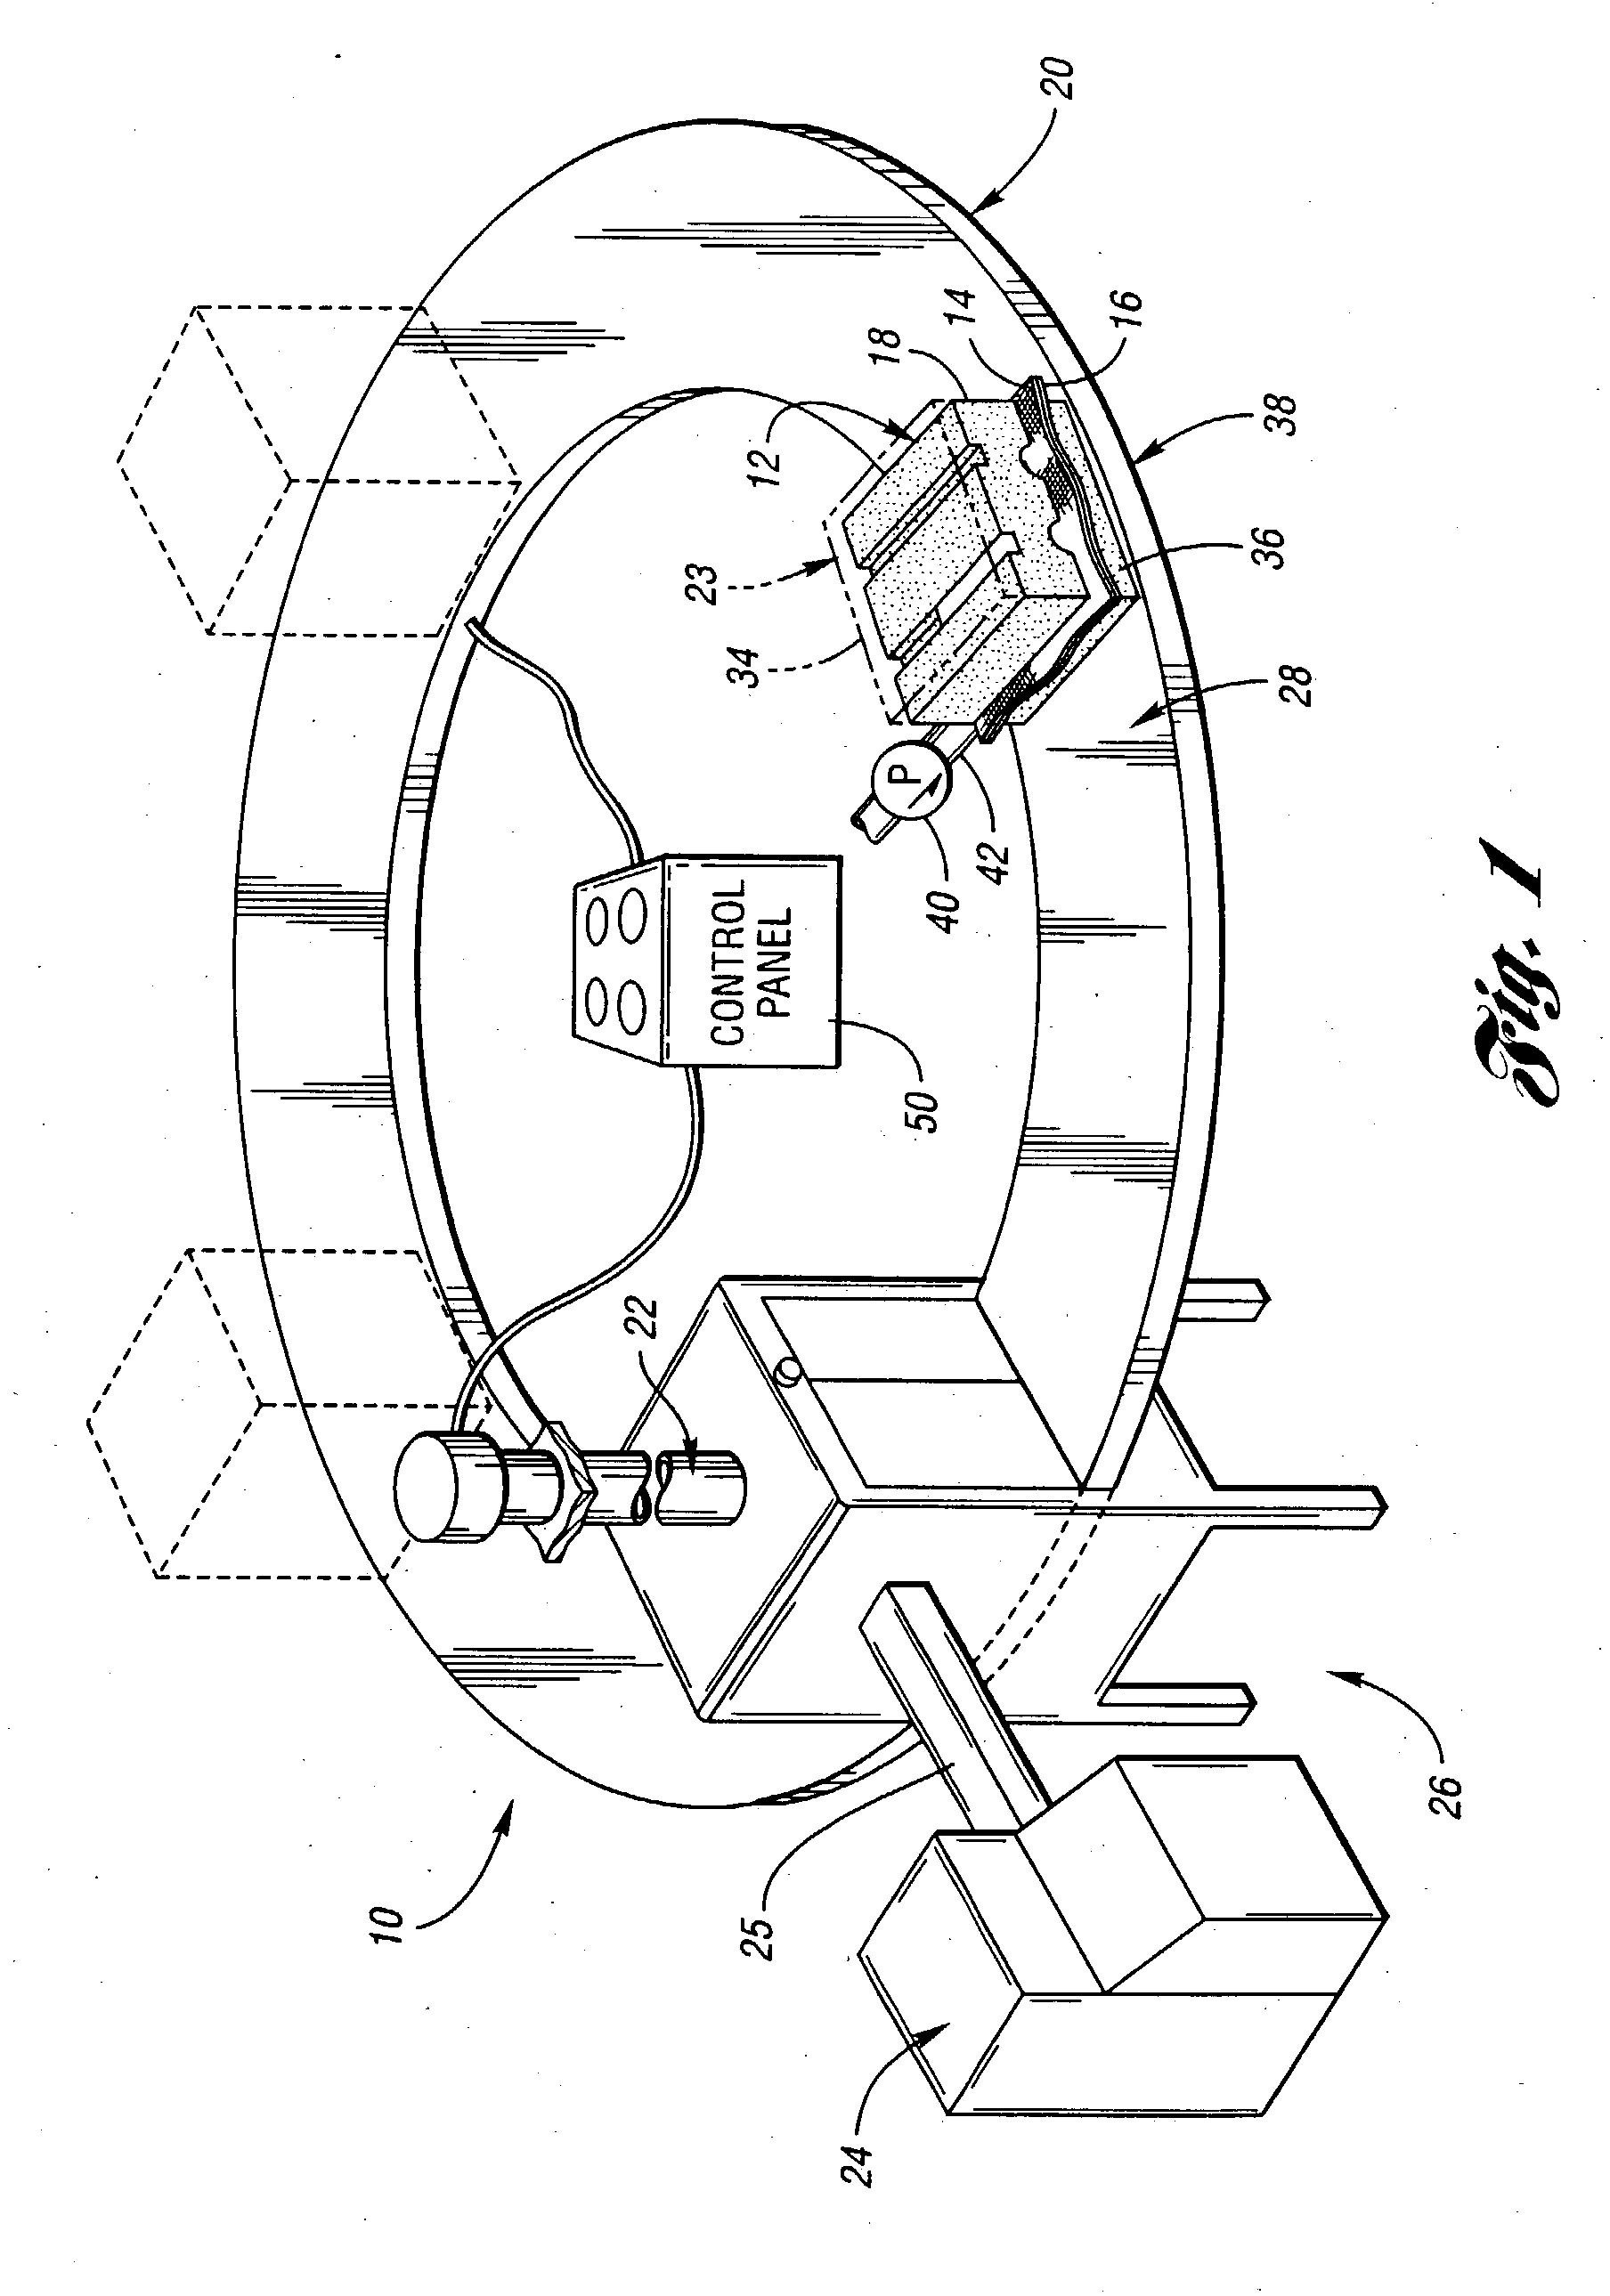 Method and apparatus for bonding a cover to a substrate using high frequency microwaves